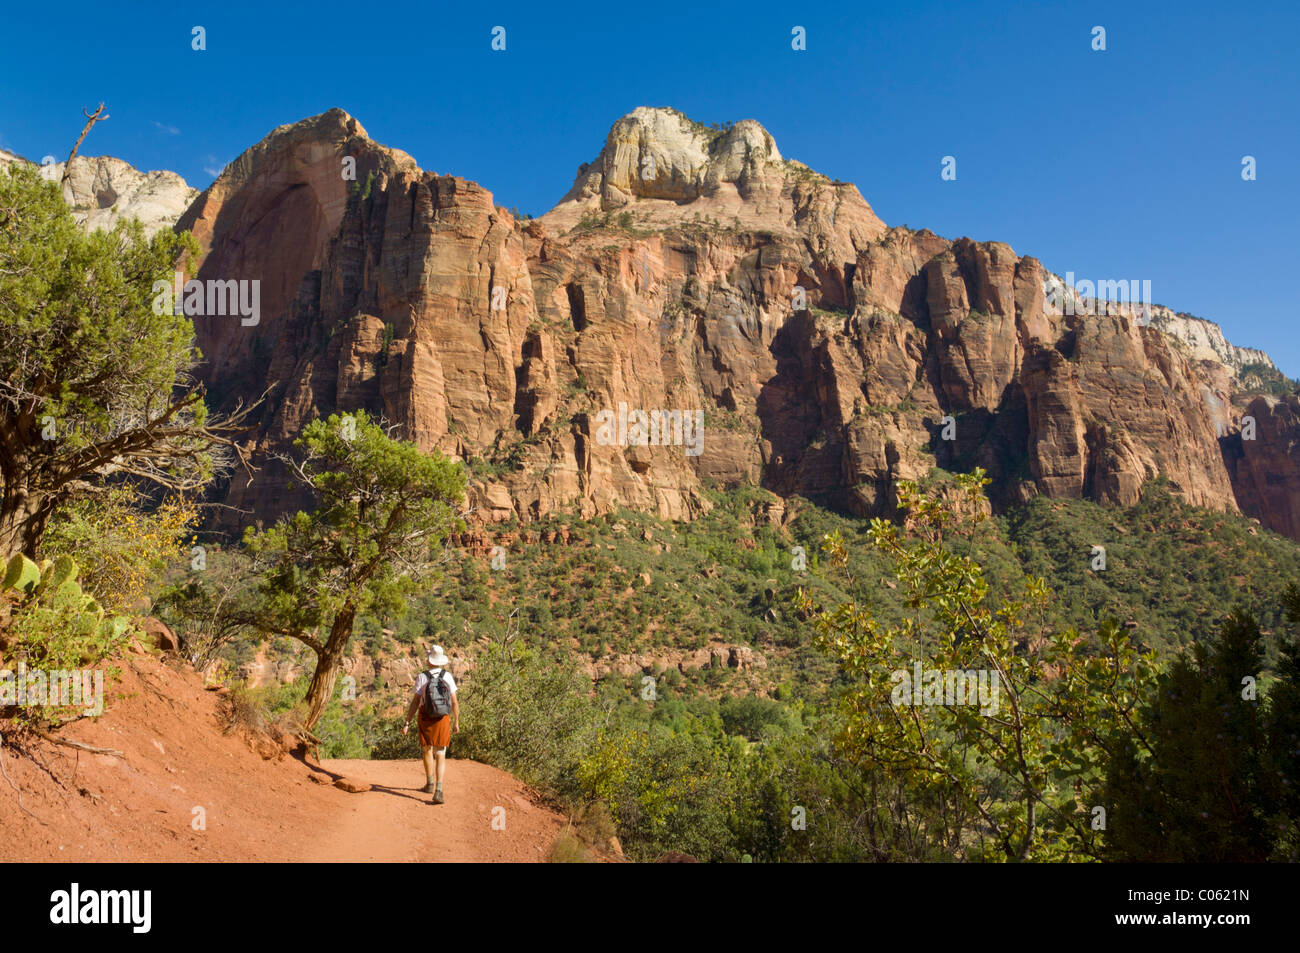 Hiker (model released) on the Emerald Pools trail, Zion National Park, Utah, USA Stock Photo